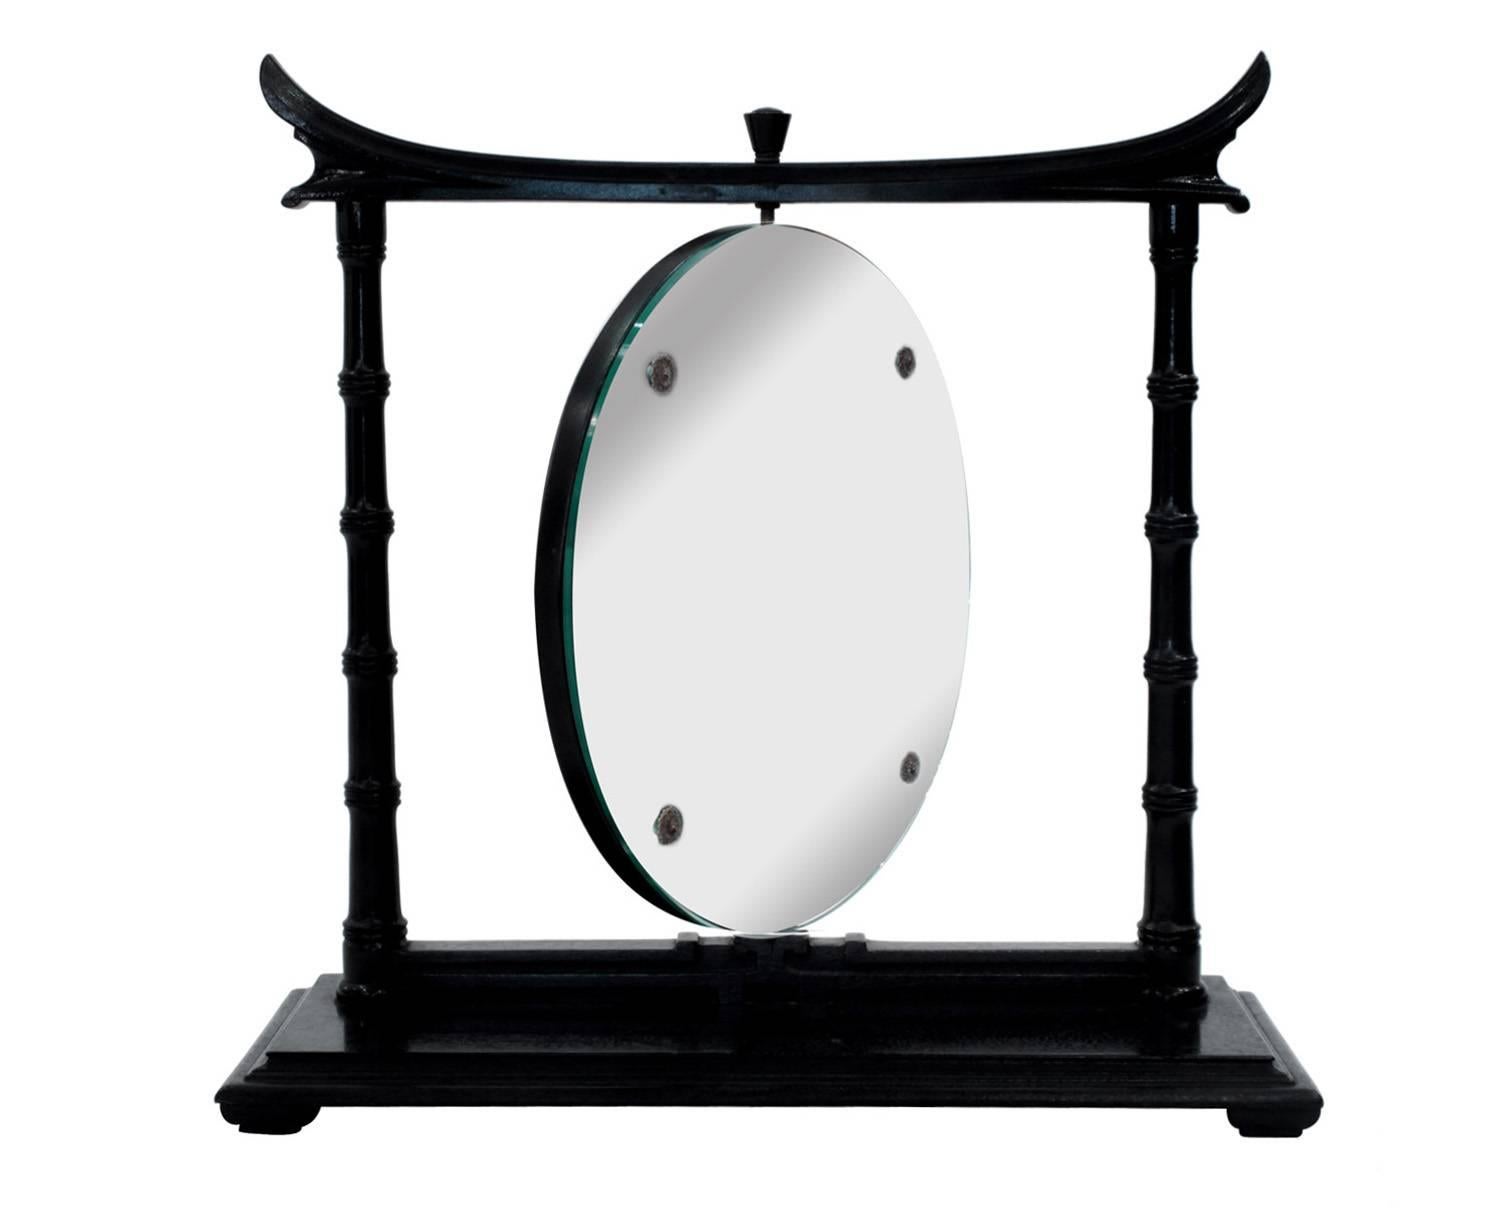 Vanity or tabletop revolving mirror in ebonized mahogany with bamboo motif by James Mont, American, 1950s.